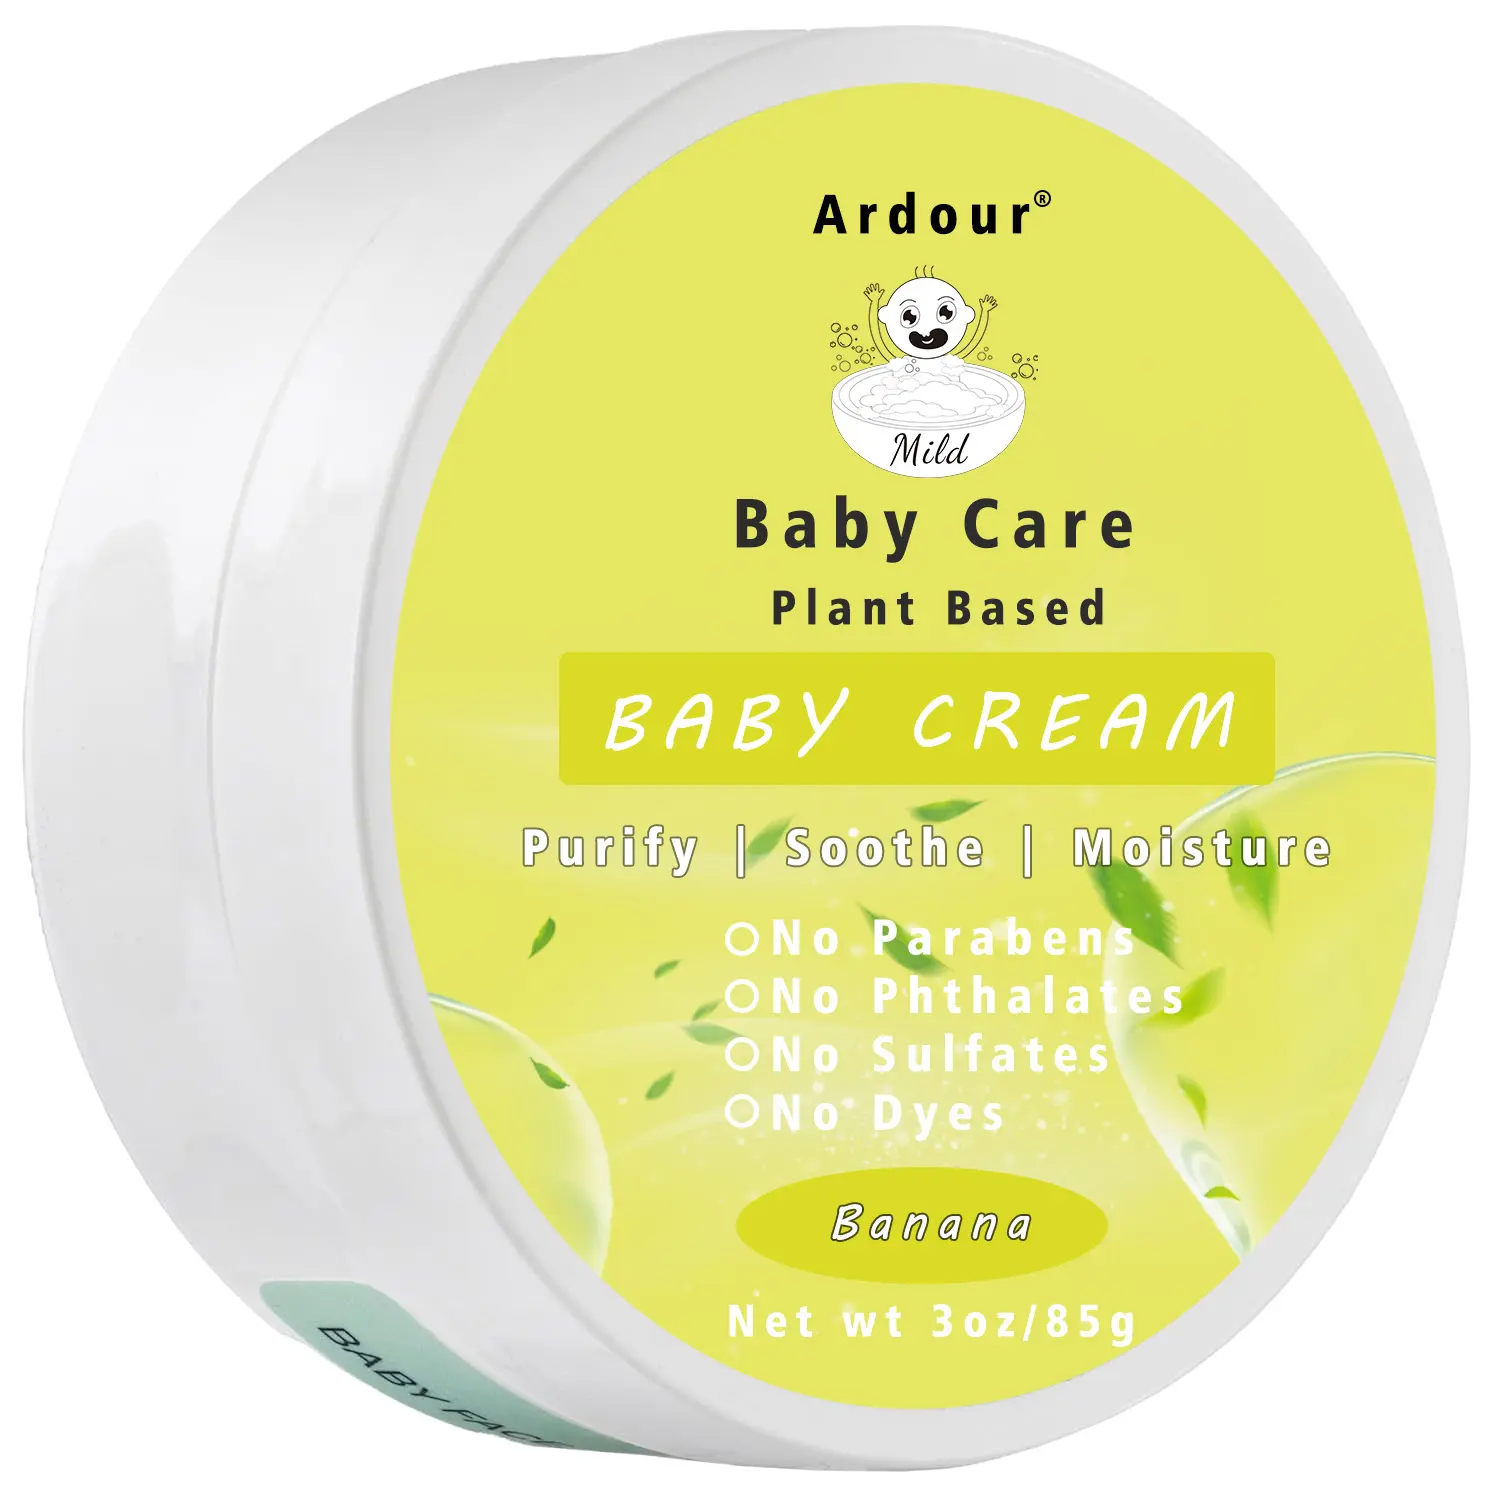 Banana Baby Cream Lotion For Babies Kids Children Newborn Infants Gentle For Baby Body And Face Skin Care Butter Balm